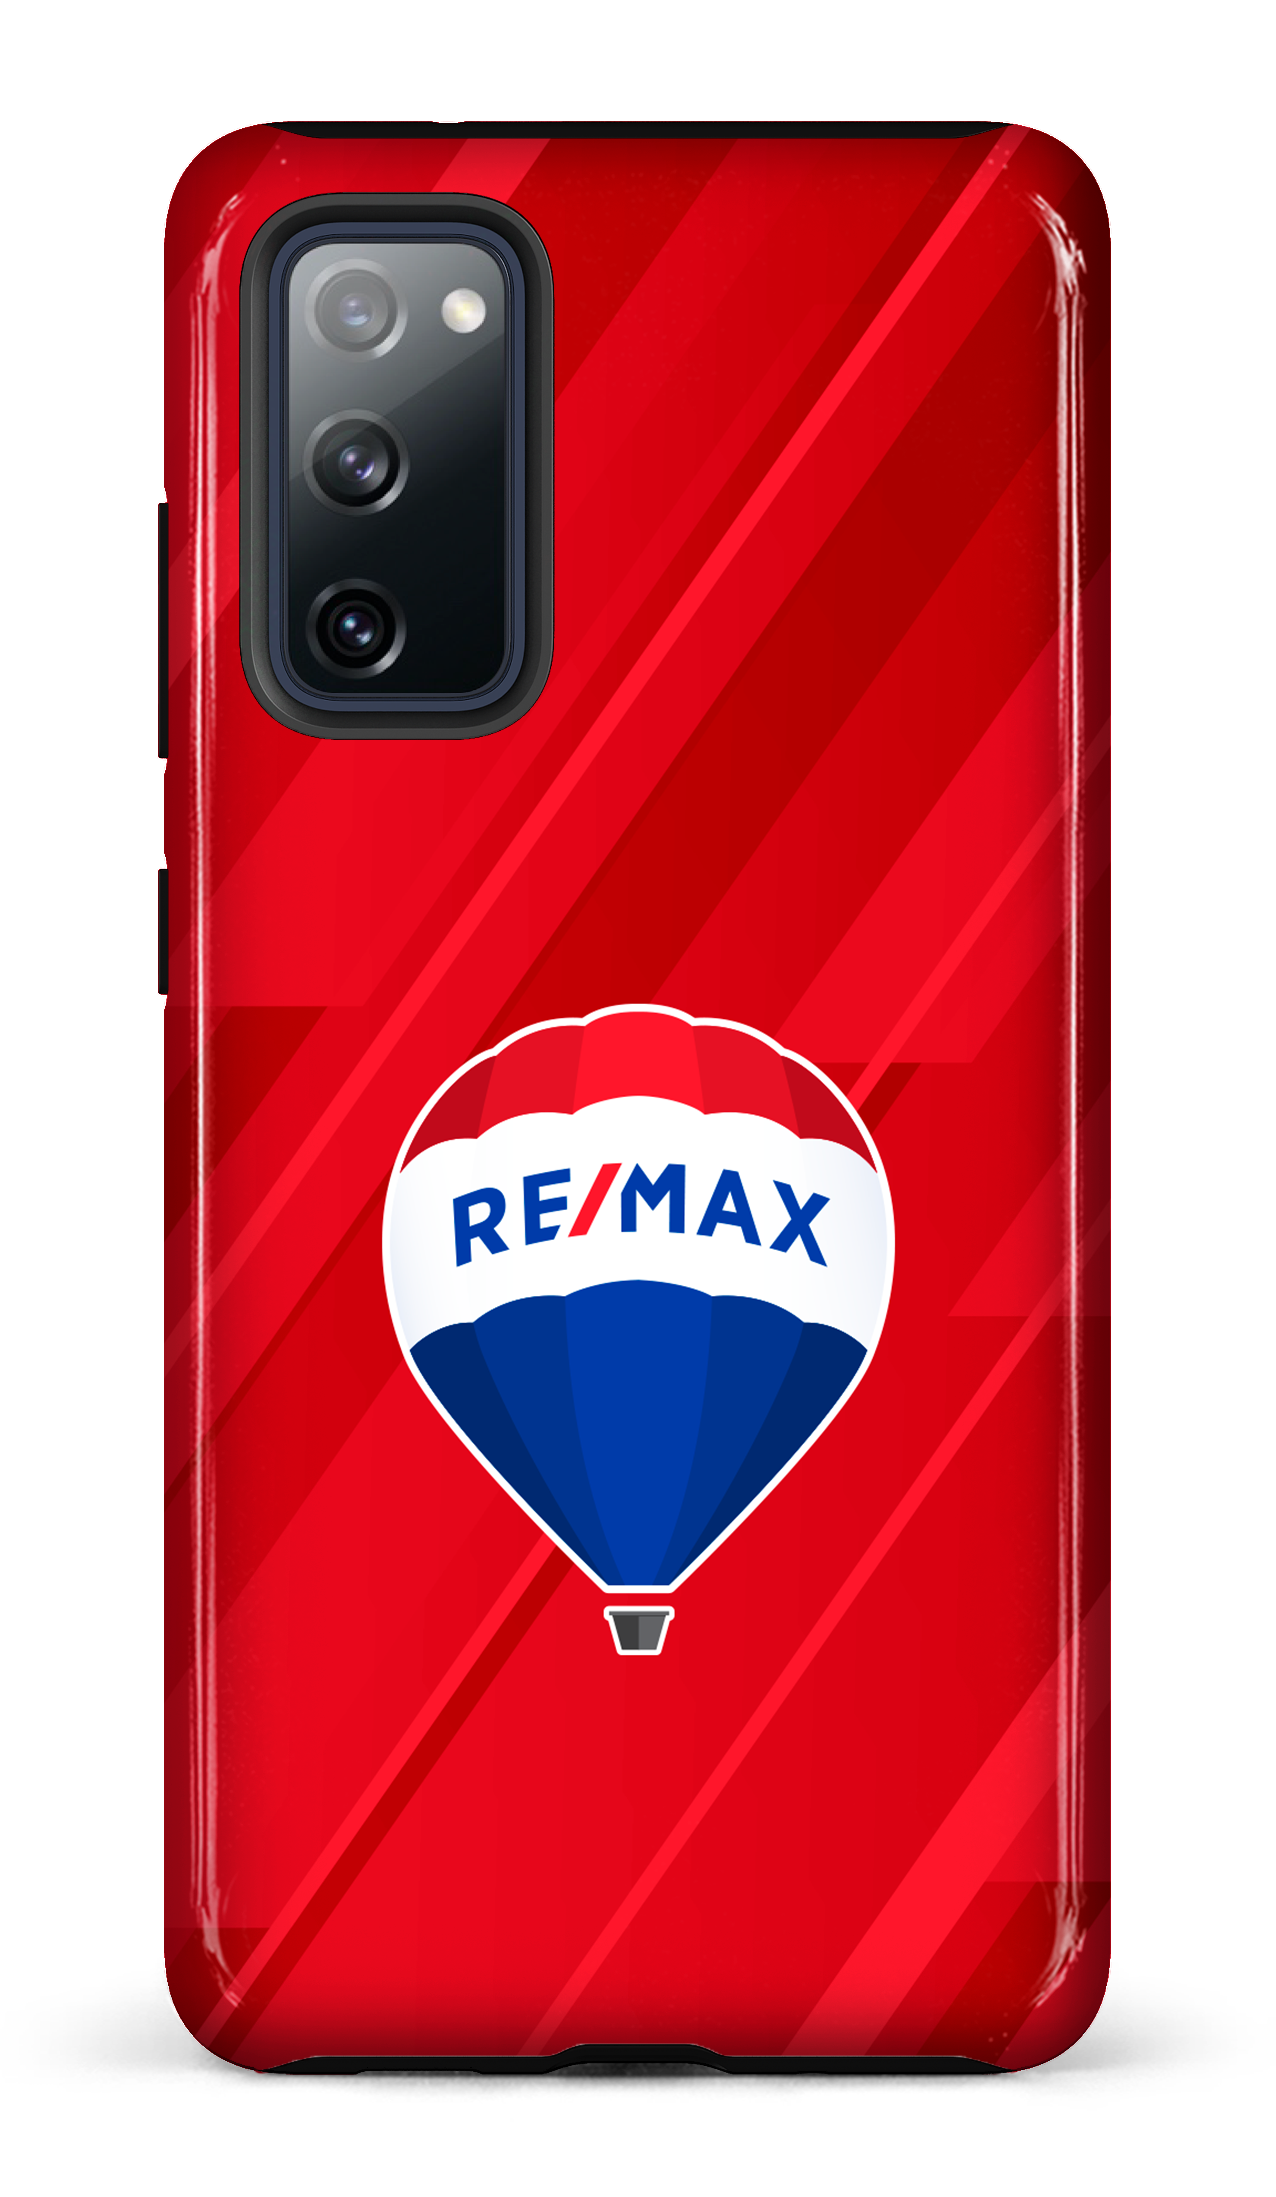 Remax Rouge - Galaxy S20 FE